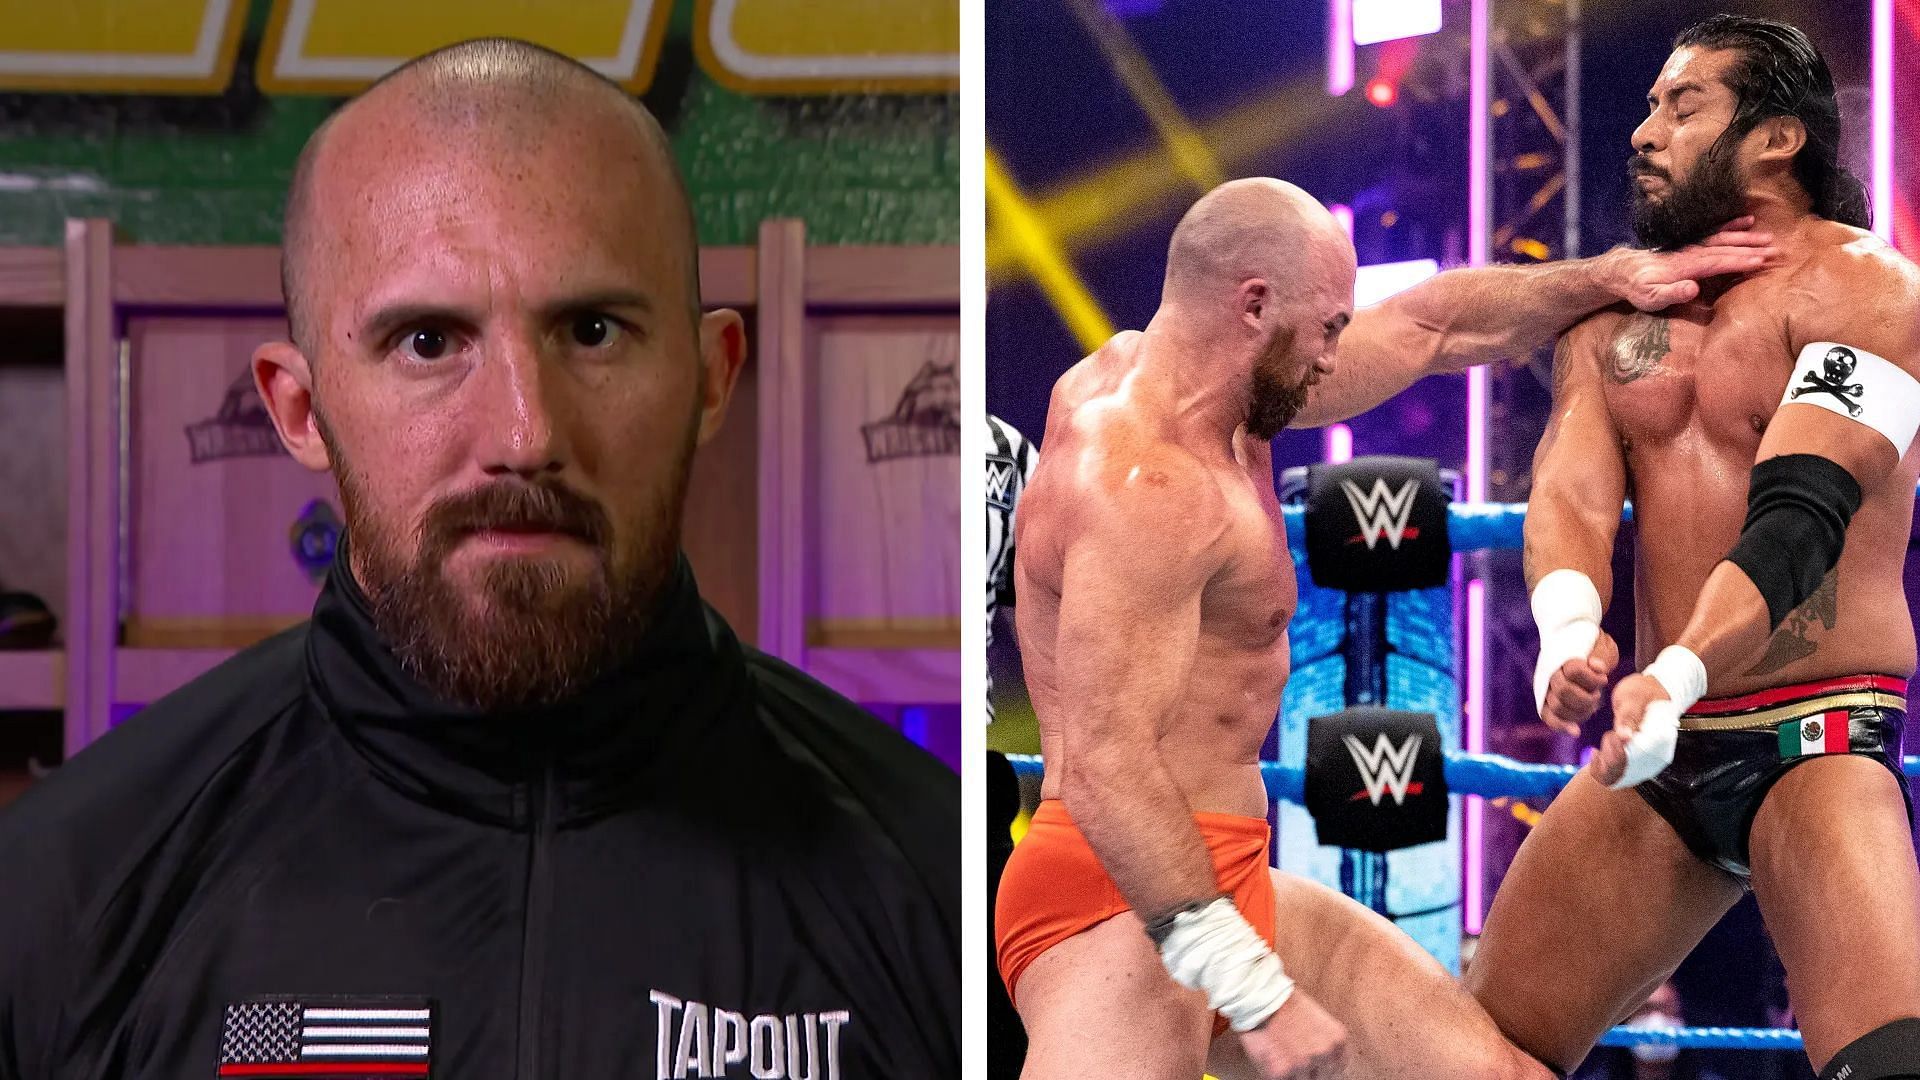 Oney Lorcan recently teased a possible return to WWE NXT